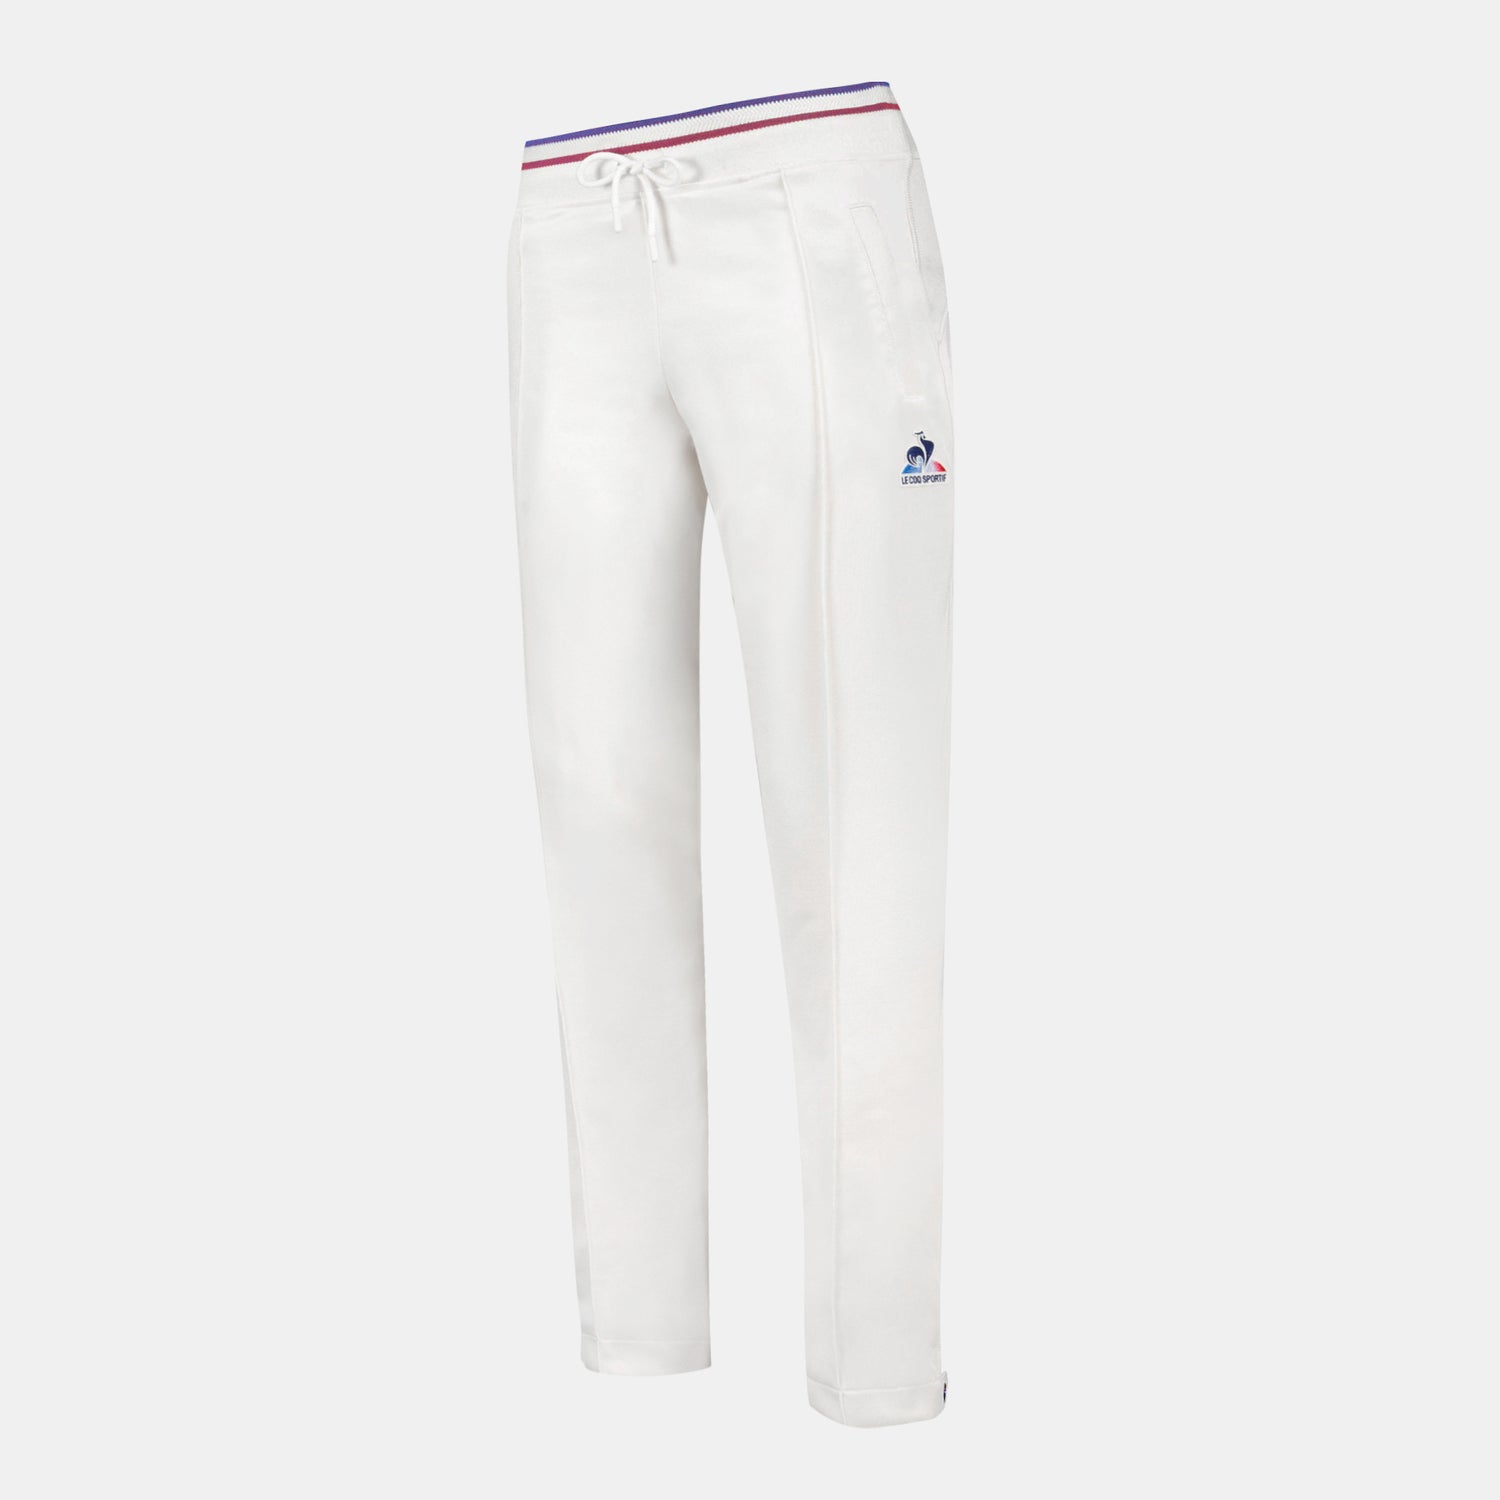 2421031-EFRO 24 Pant N°4 W écru  | Trousers for women